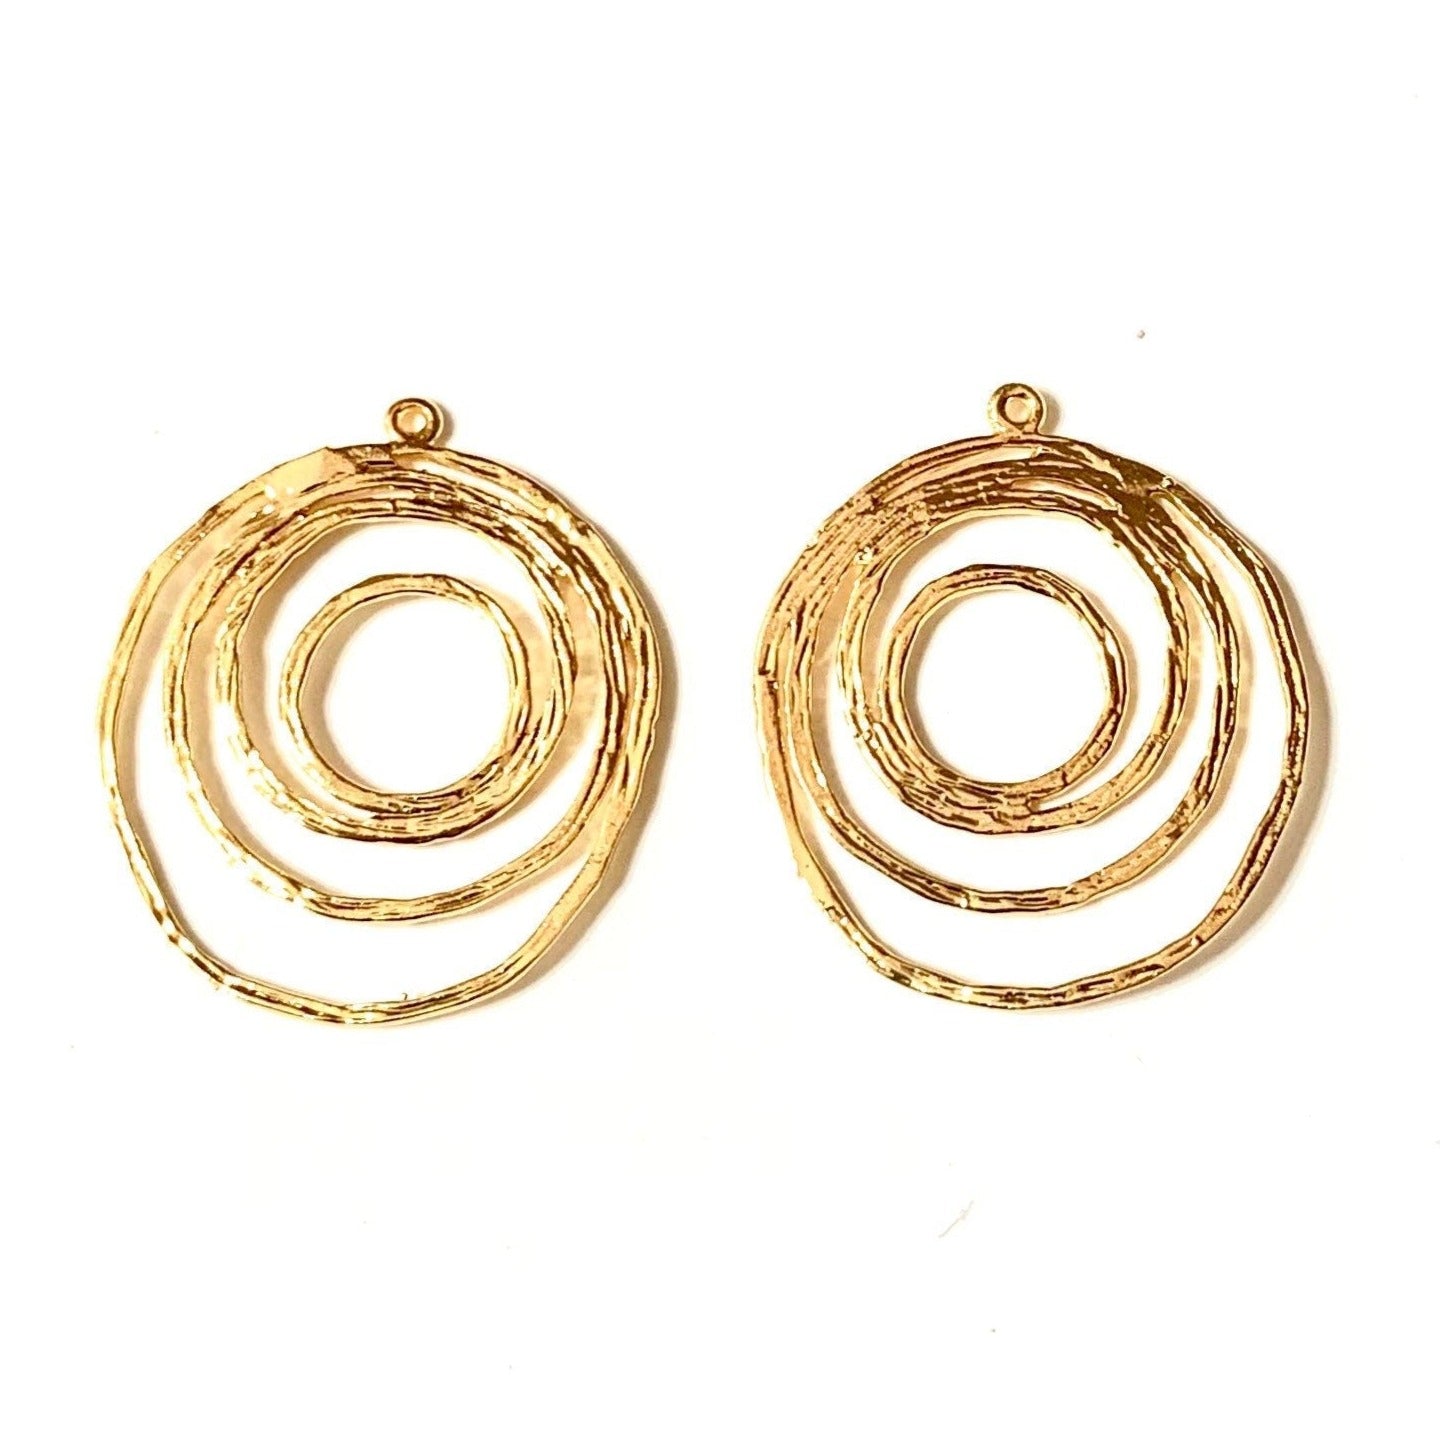 4 Earring Connectors - 18K Gold Plated Brass - 30mm